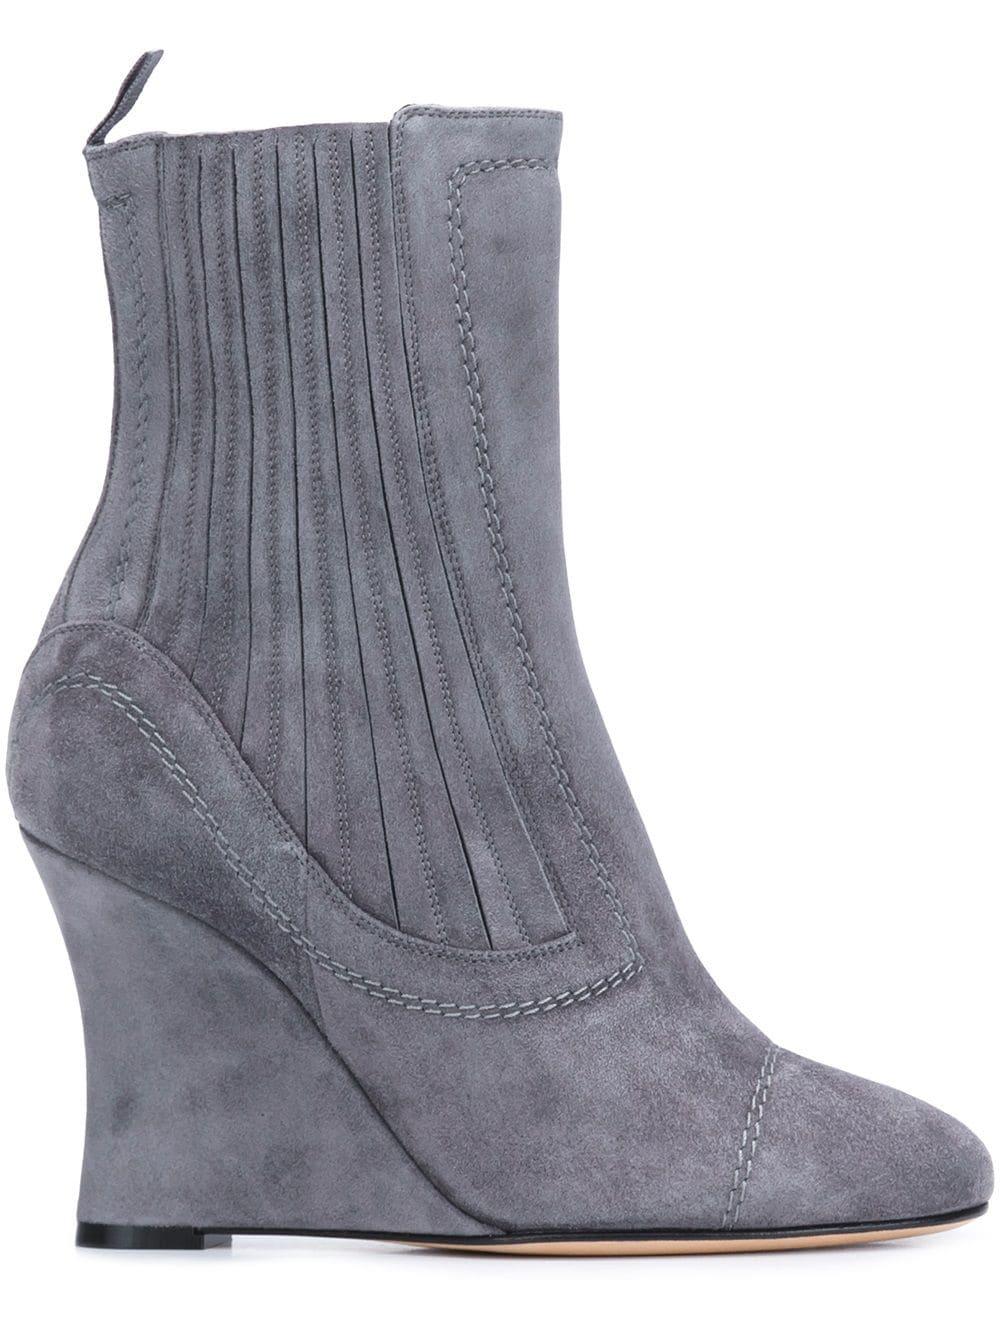 ribbed wedge ankle boots by ALCHIMIA DI BALLIN